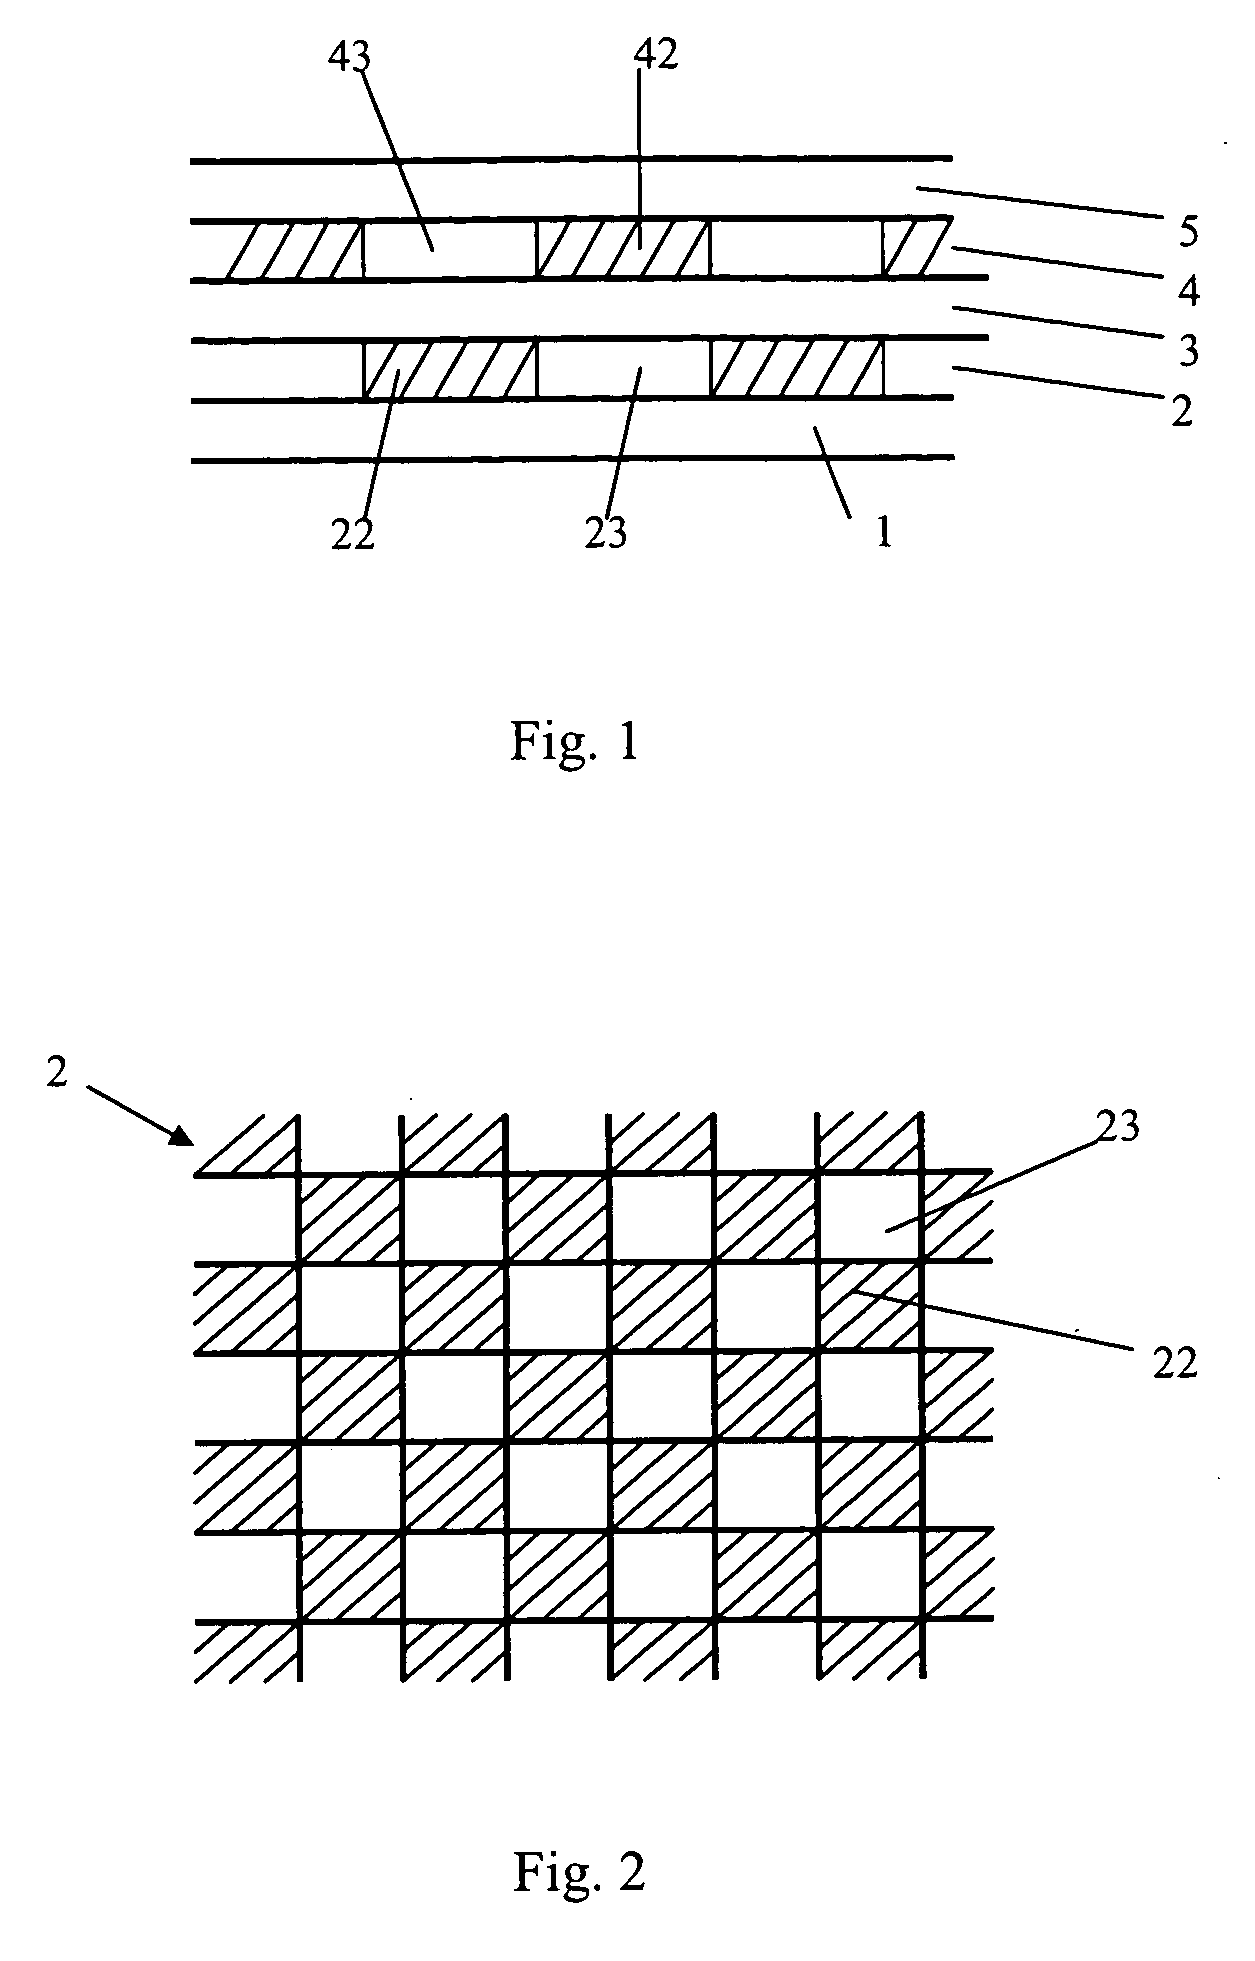 Material having characteristics of high thermal conductivity and electromagnetic interference resistance